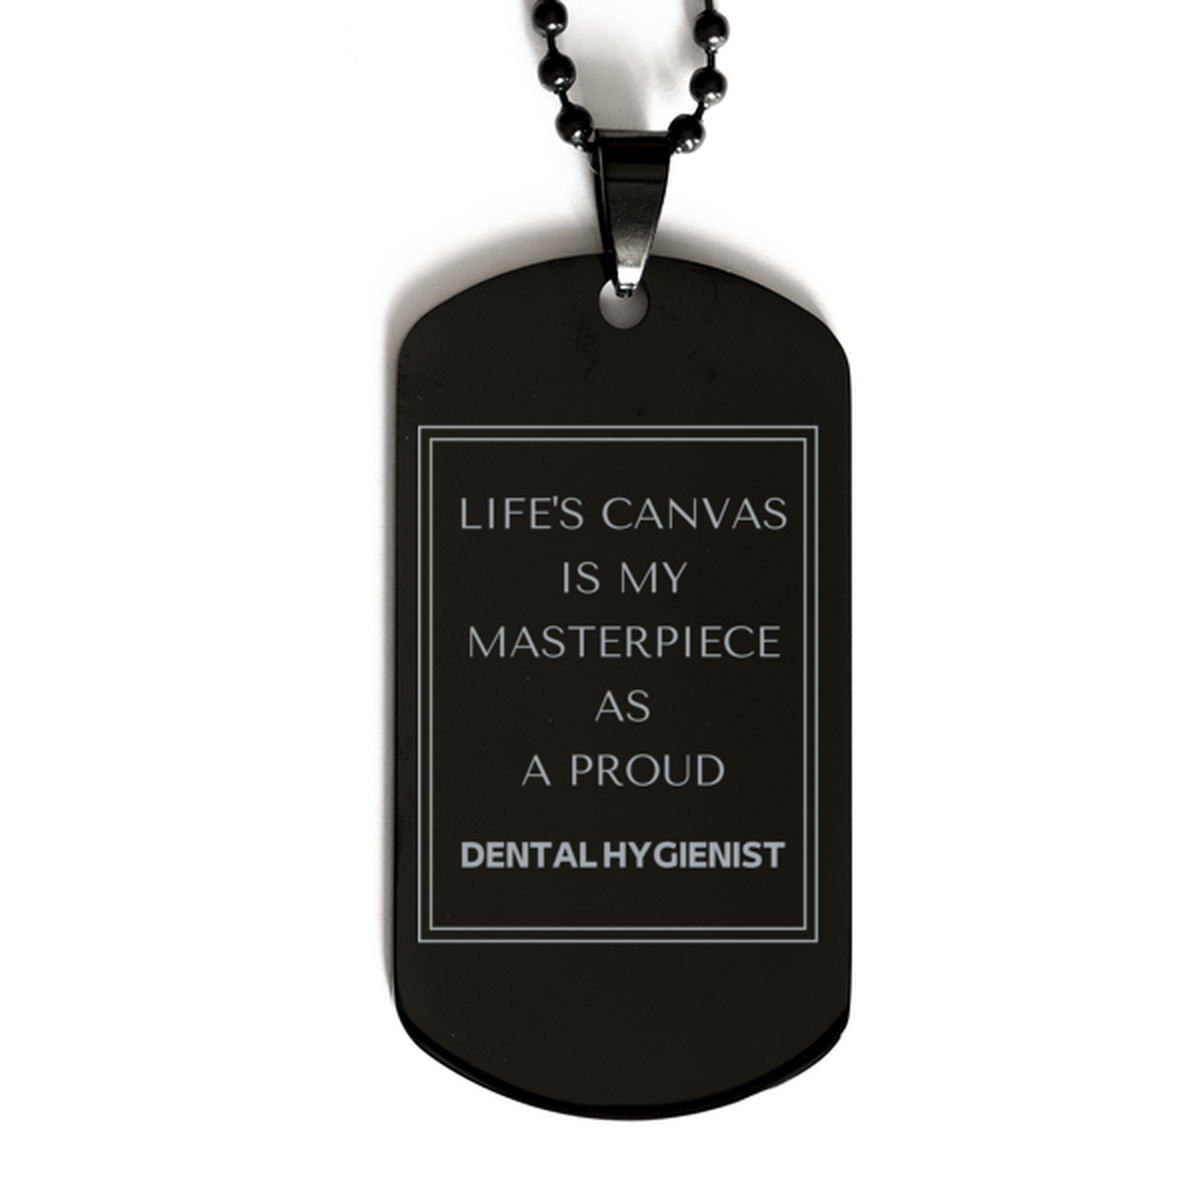 Proud Dental Hygienist Gifts, Life's canvas is my masterpiece, Epic Birthday Christmas Unique Black Dog Tag For Dental Hygienist, Coworkers, Men, Women, Friends